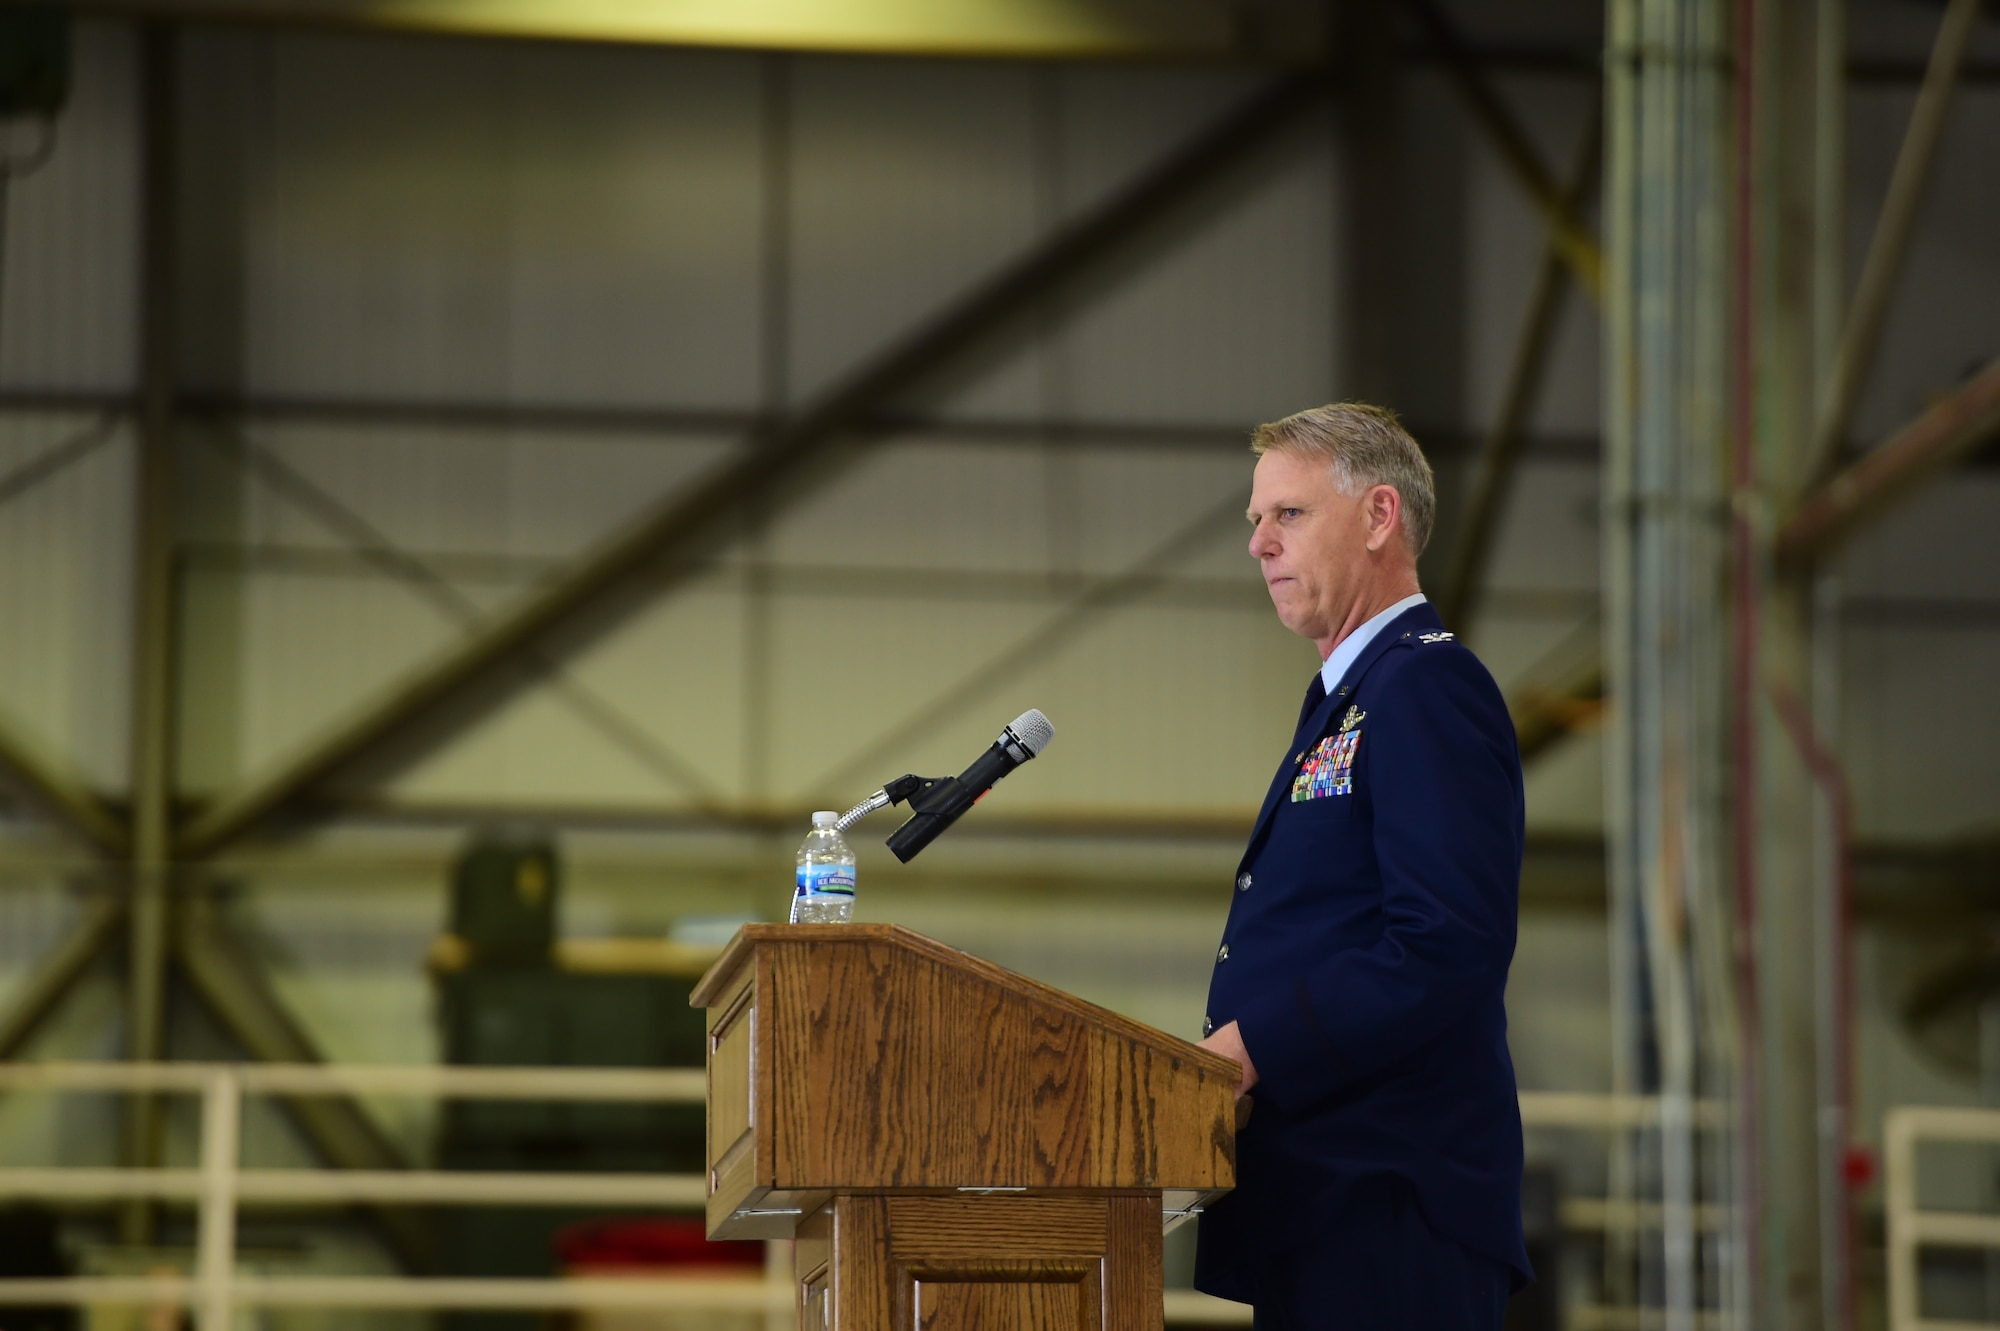 Grissom bids farewell to Col. Larry Shaw